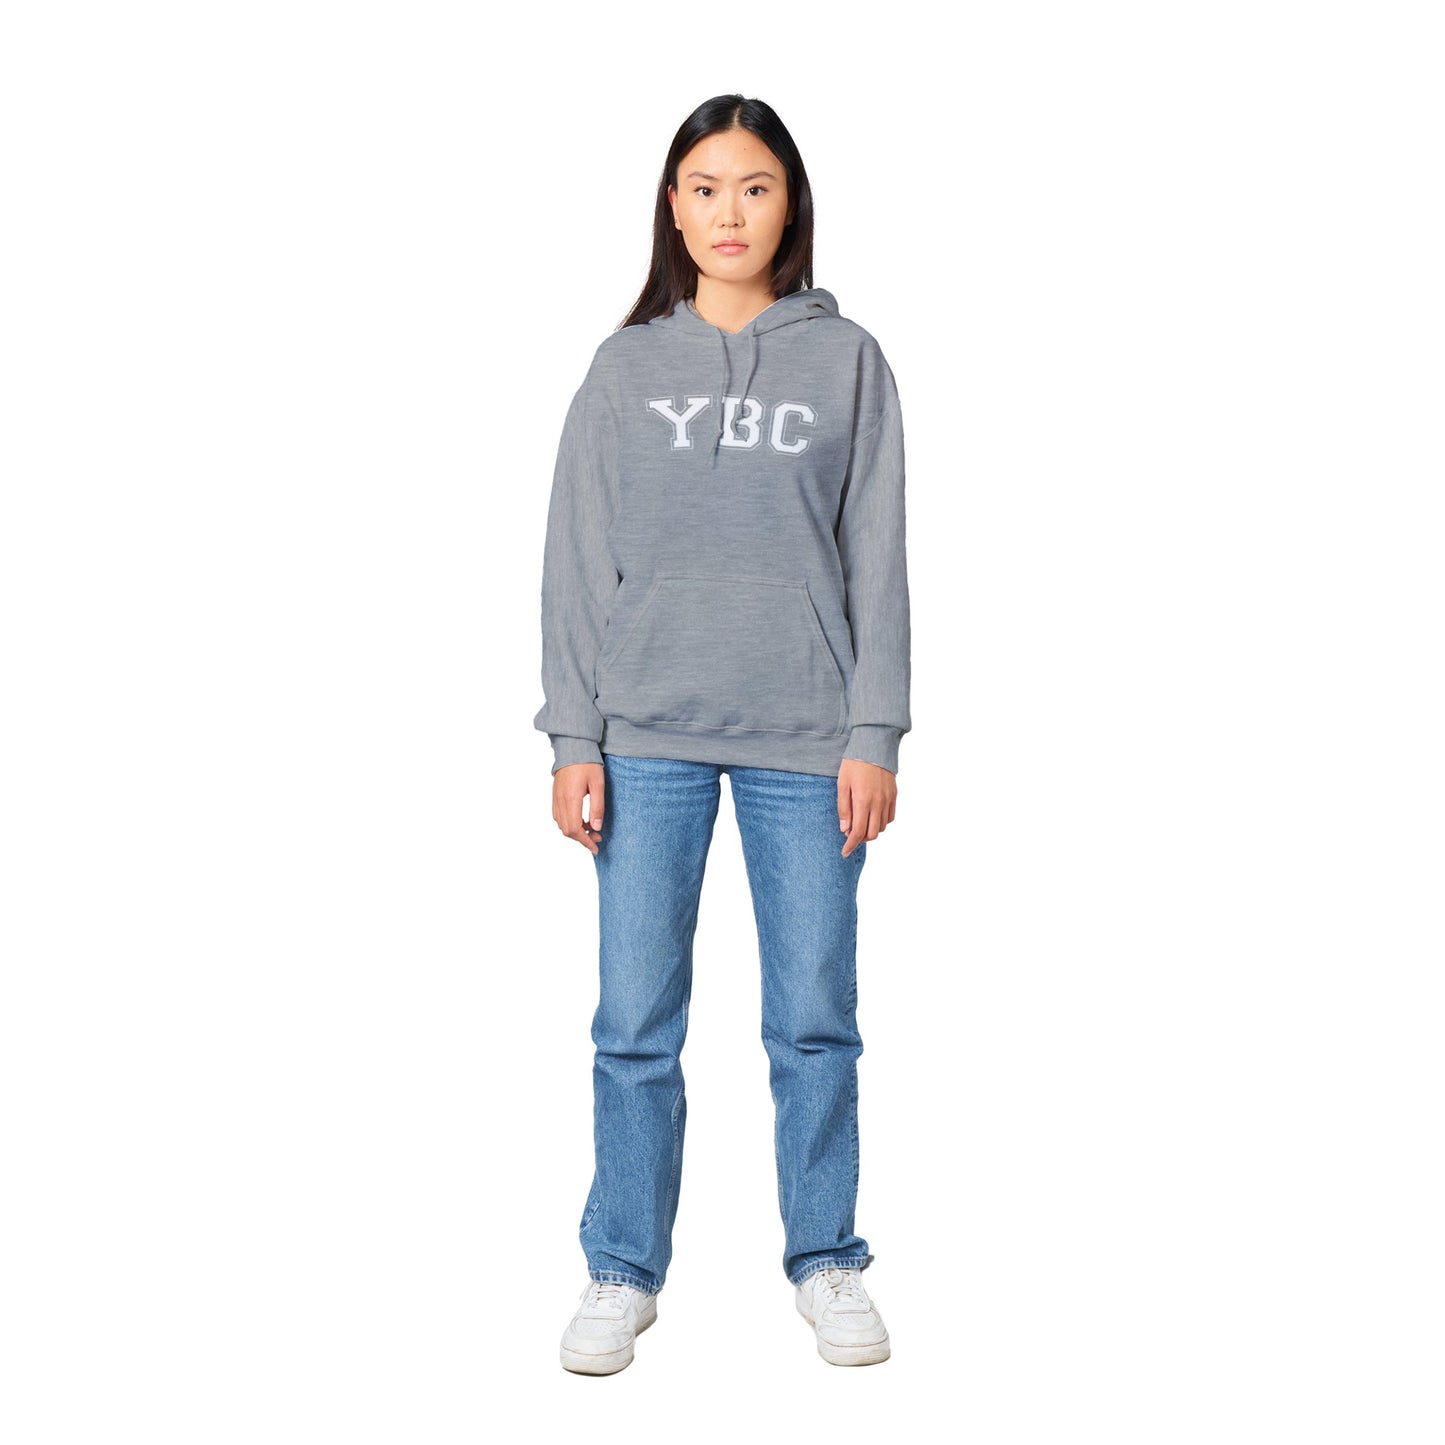 YBC (YOUNG BUSINESS CREATIVE) - Unisex hoodie - 5 färger